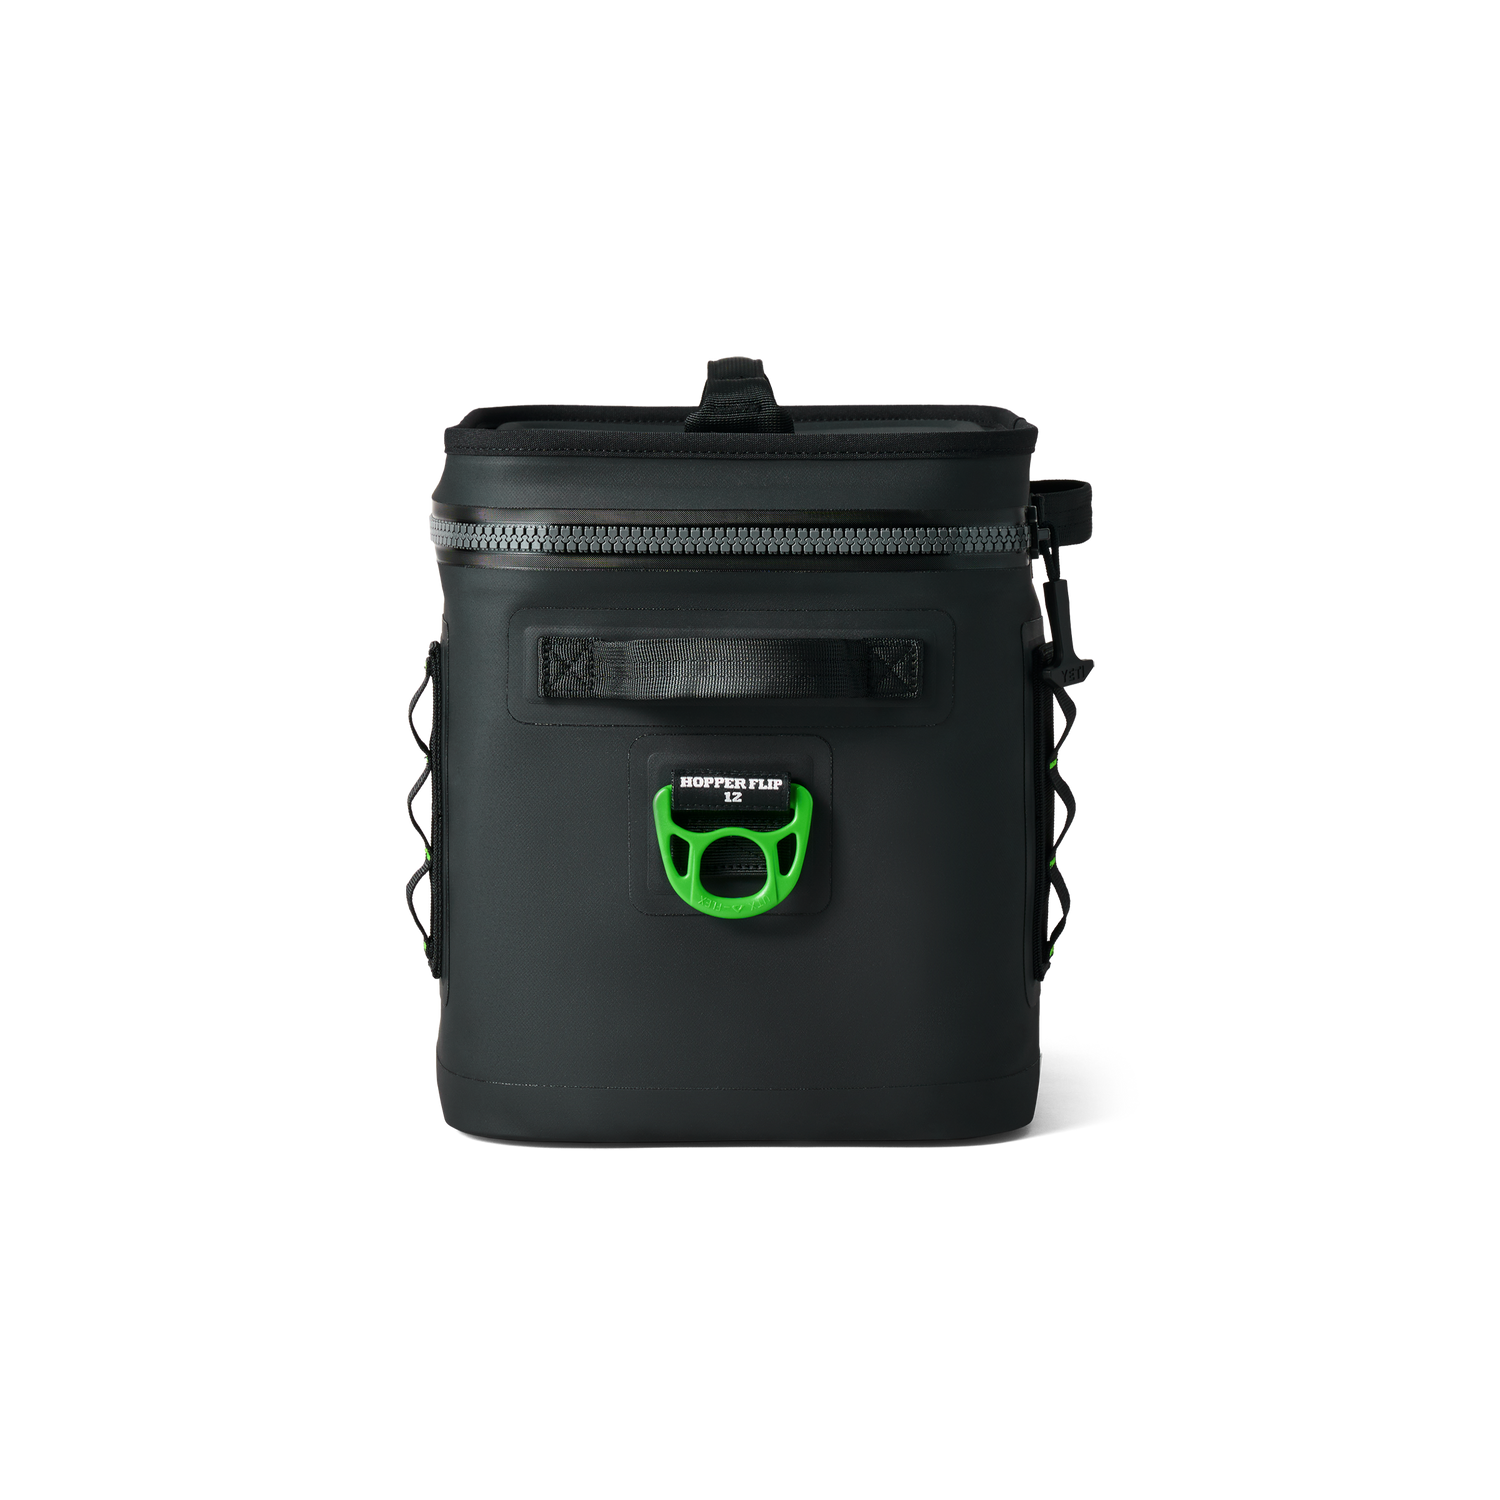 Come and Steak It® YETI® Flip 12 Soft Cooler